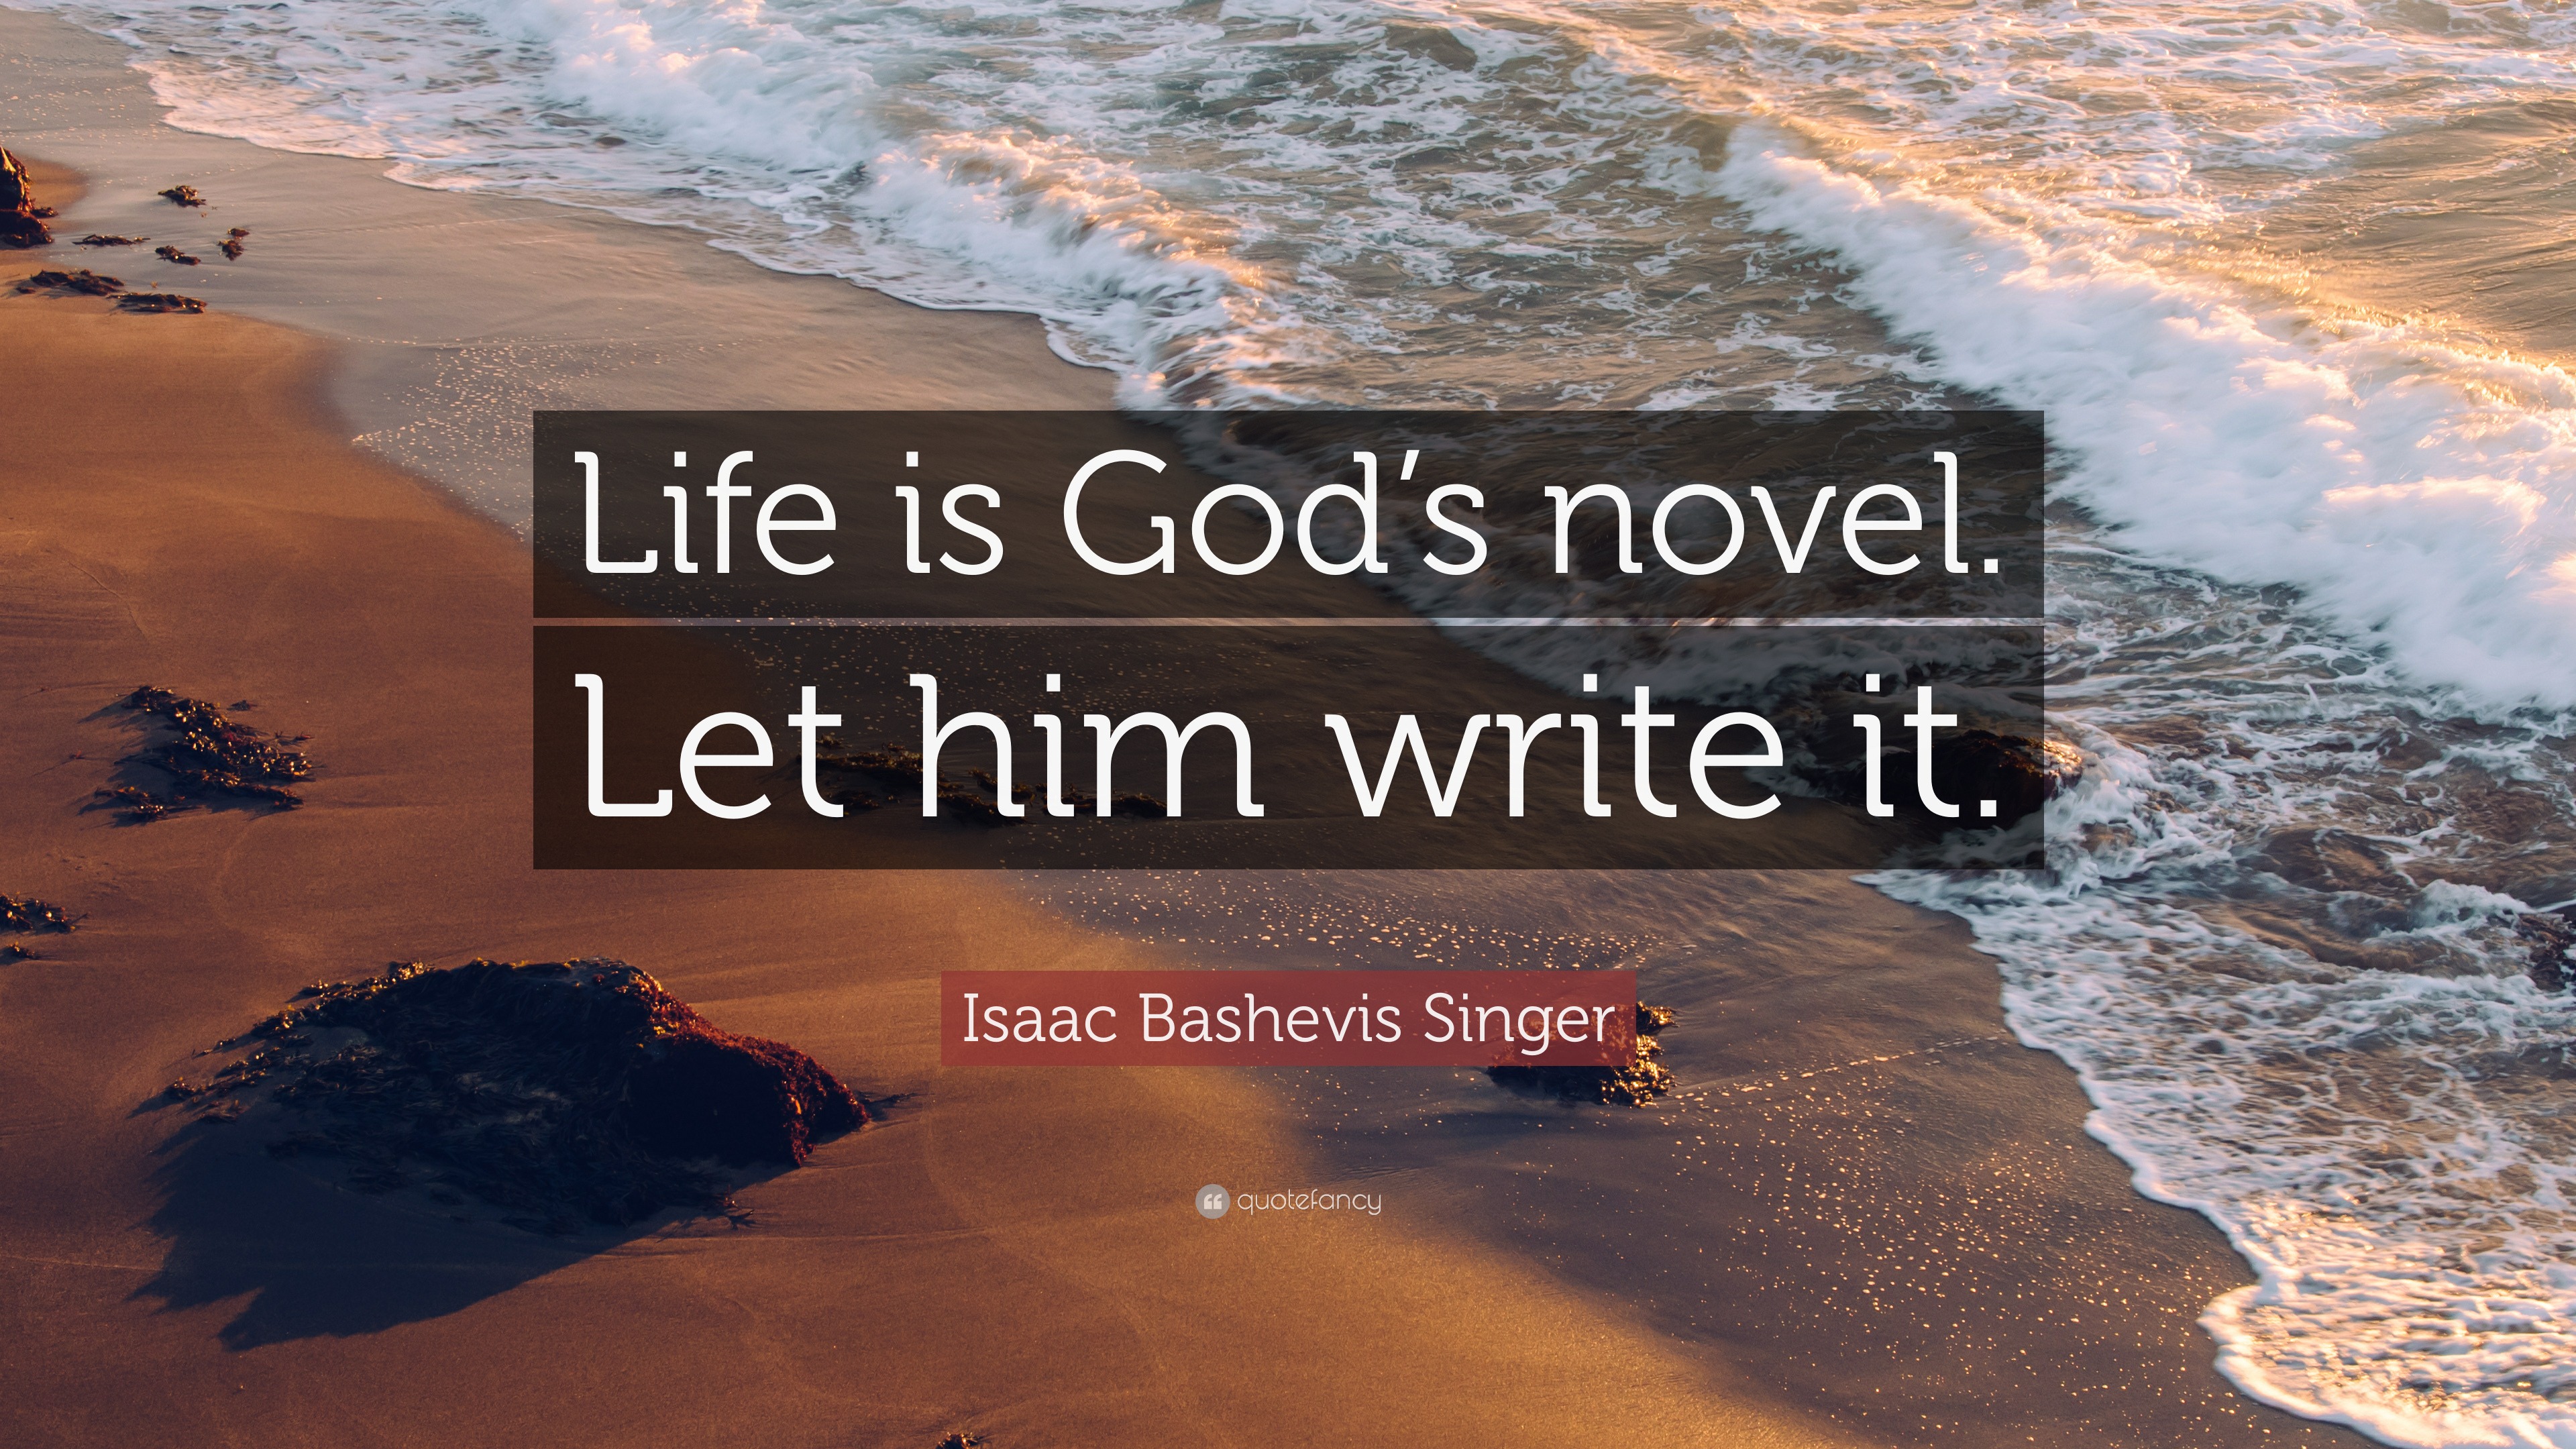 Download Isaac Bashevis Singer Quote: "Life is God's novel. Let him write it." (12 wallpapers) - Quotefancy